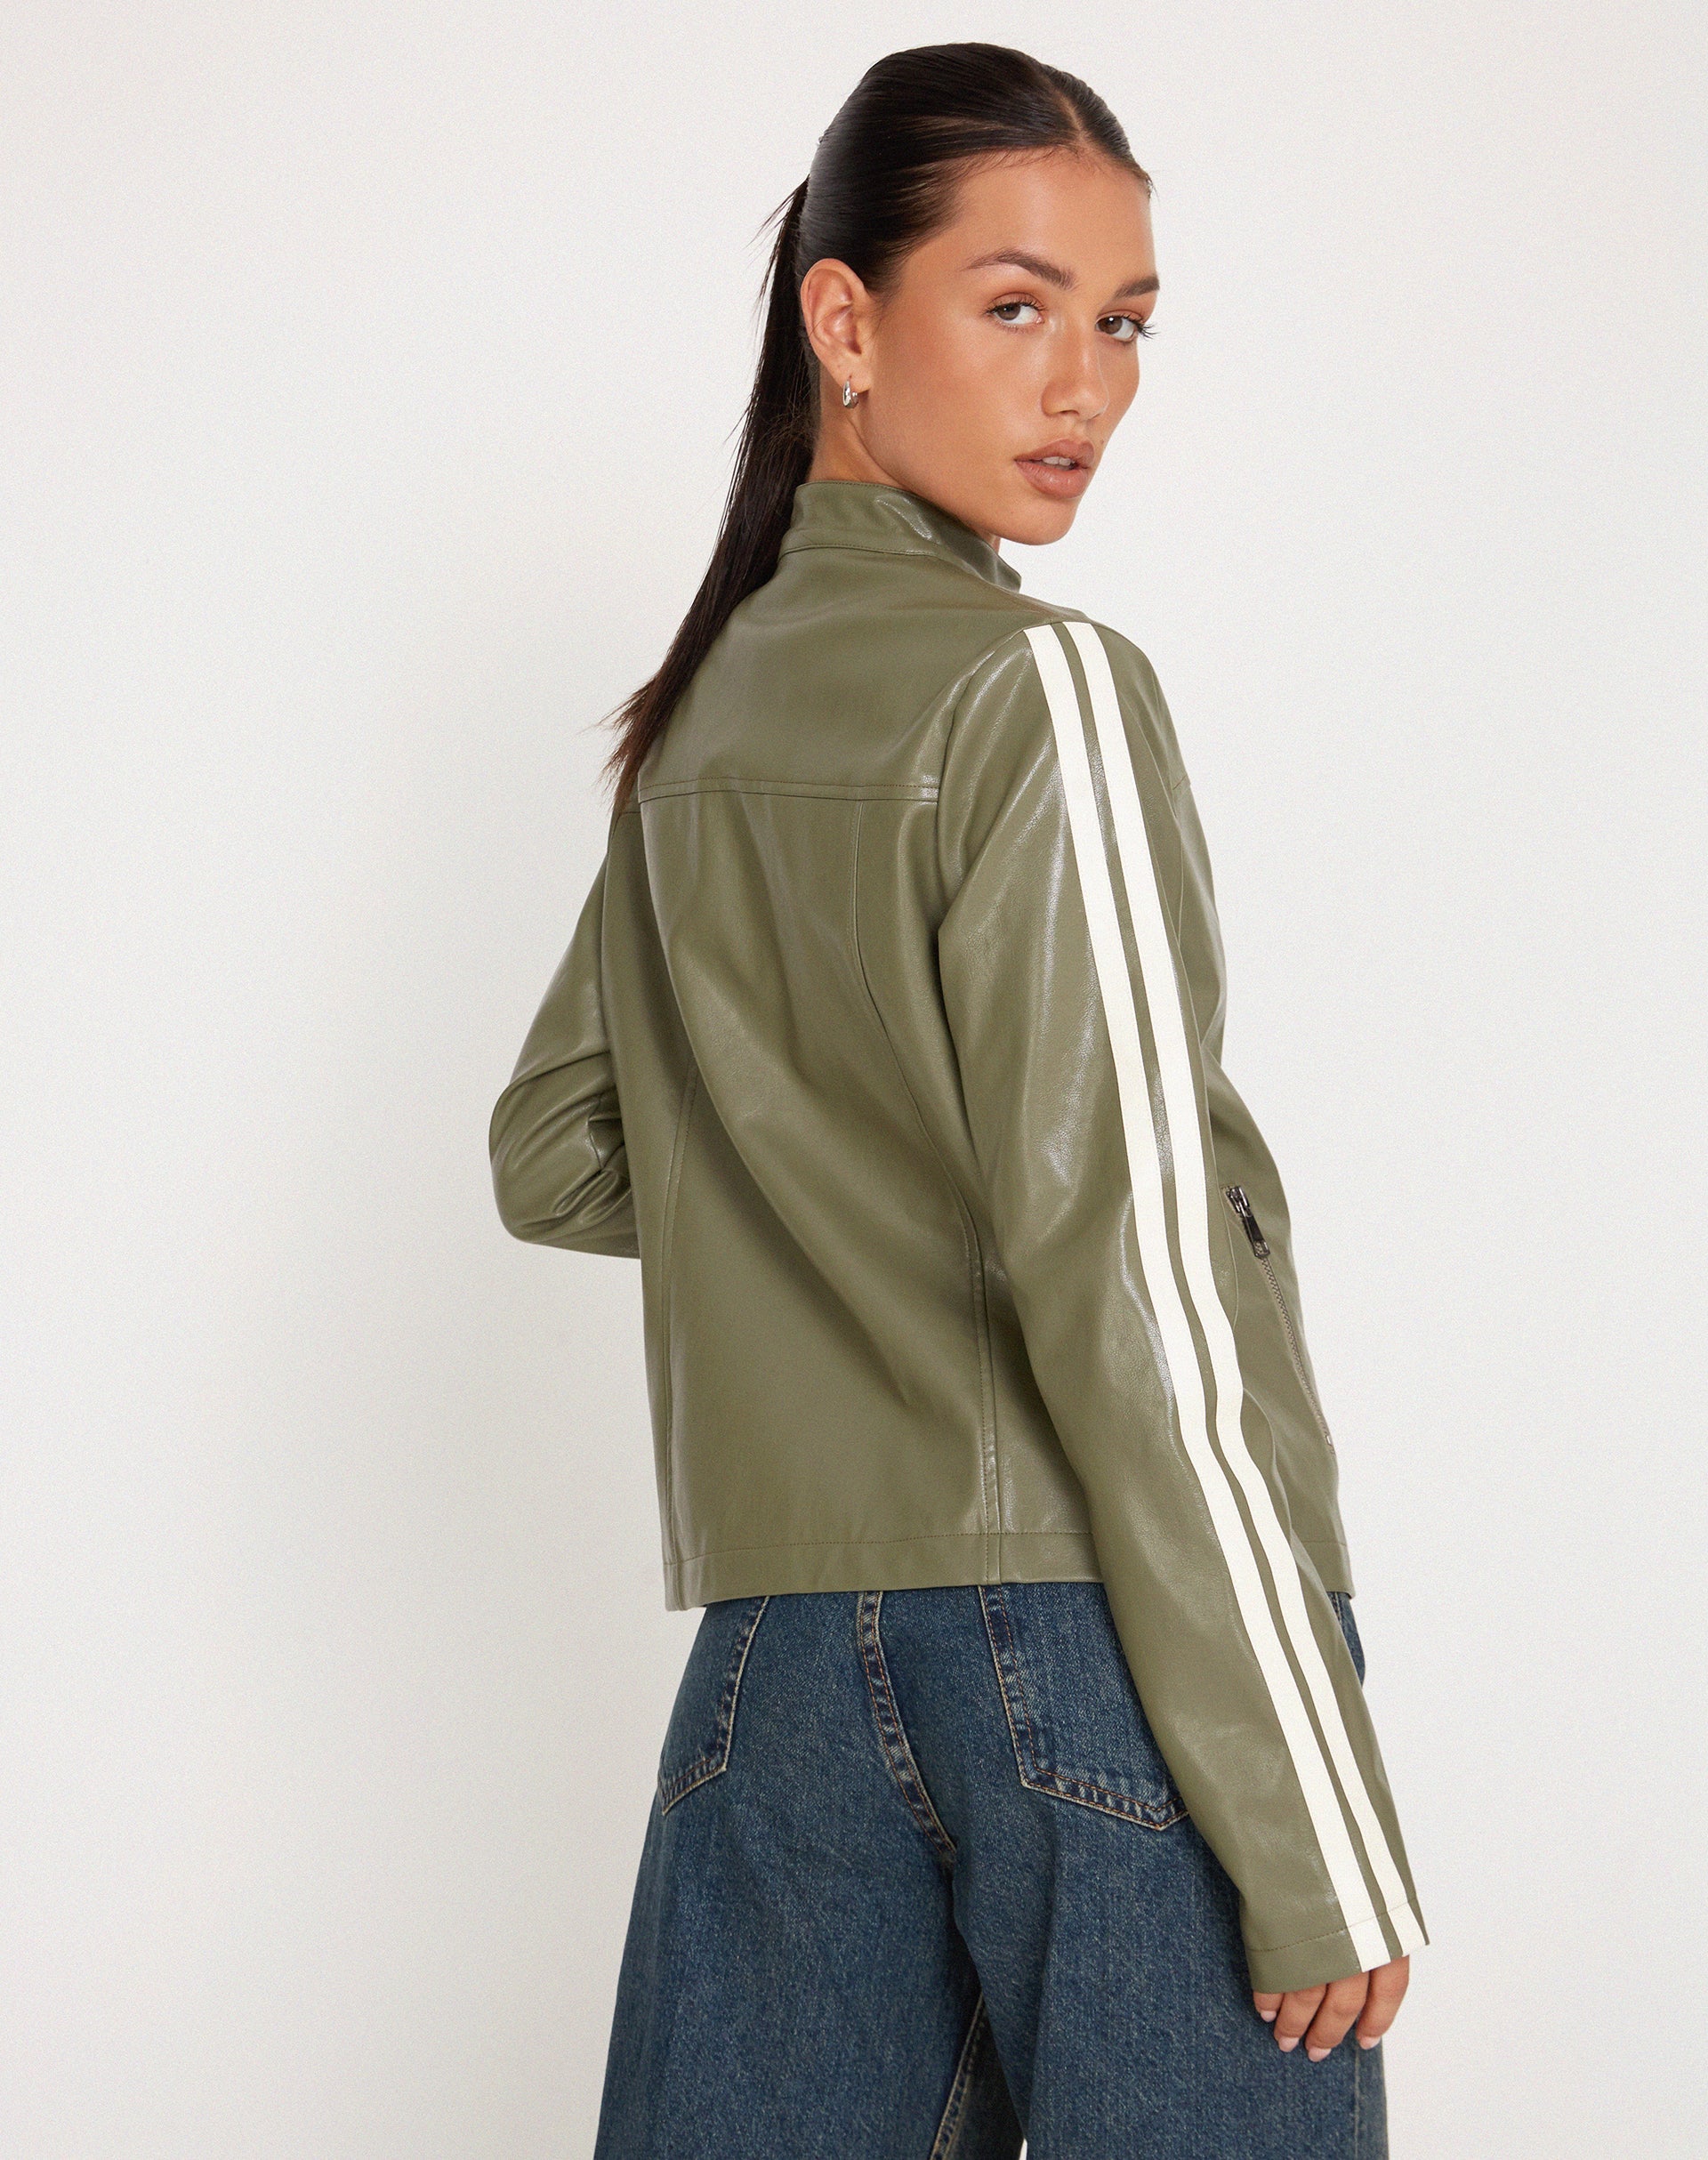 image of Jacquie Zip Up Biker Jacket in PU Green with Ivory Stripe